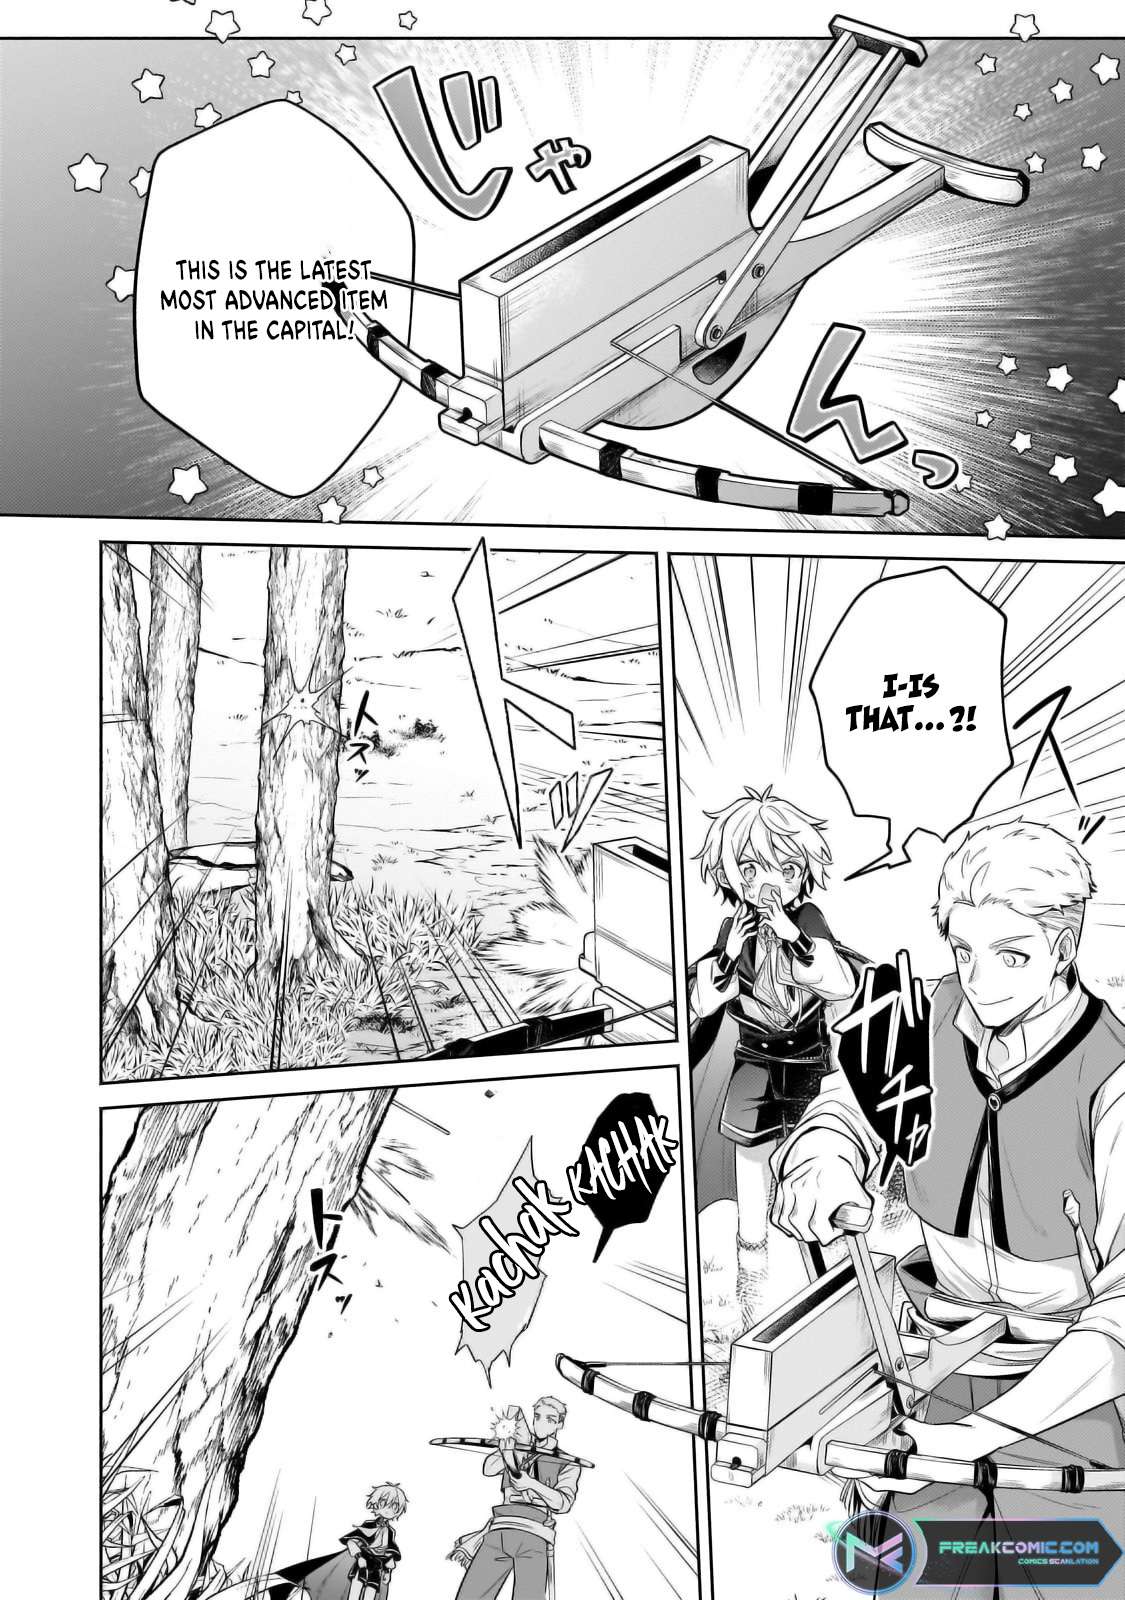 Easygoing Territory Defense By The Optimistic Lord: Production Magic Turns A Nameless Village Into The Strongest Fortified City - chapter 29.2 - #4